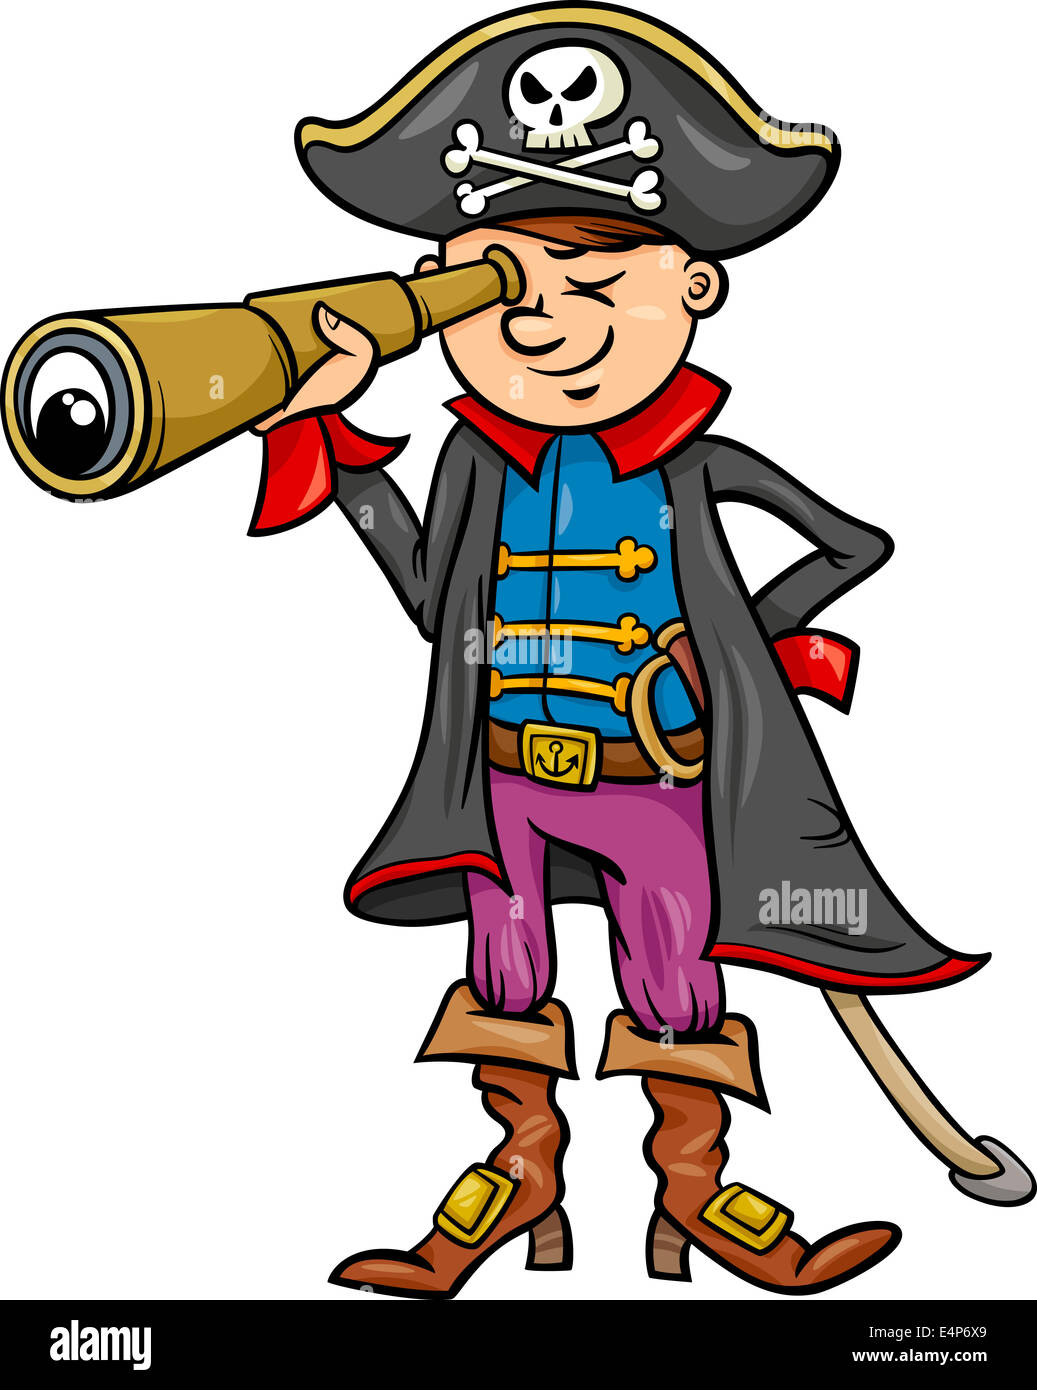 Cartoon Illustration of Funny Pirate or Corsair Captain Boy with Spyglass and Jolly Roger Sign Stock Photo